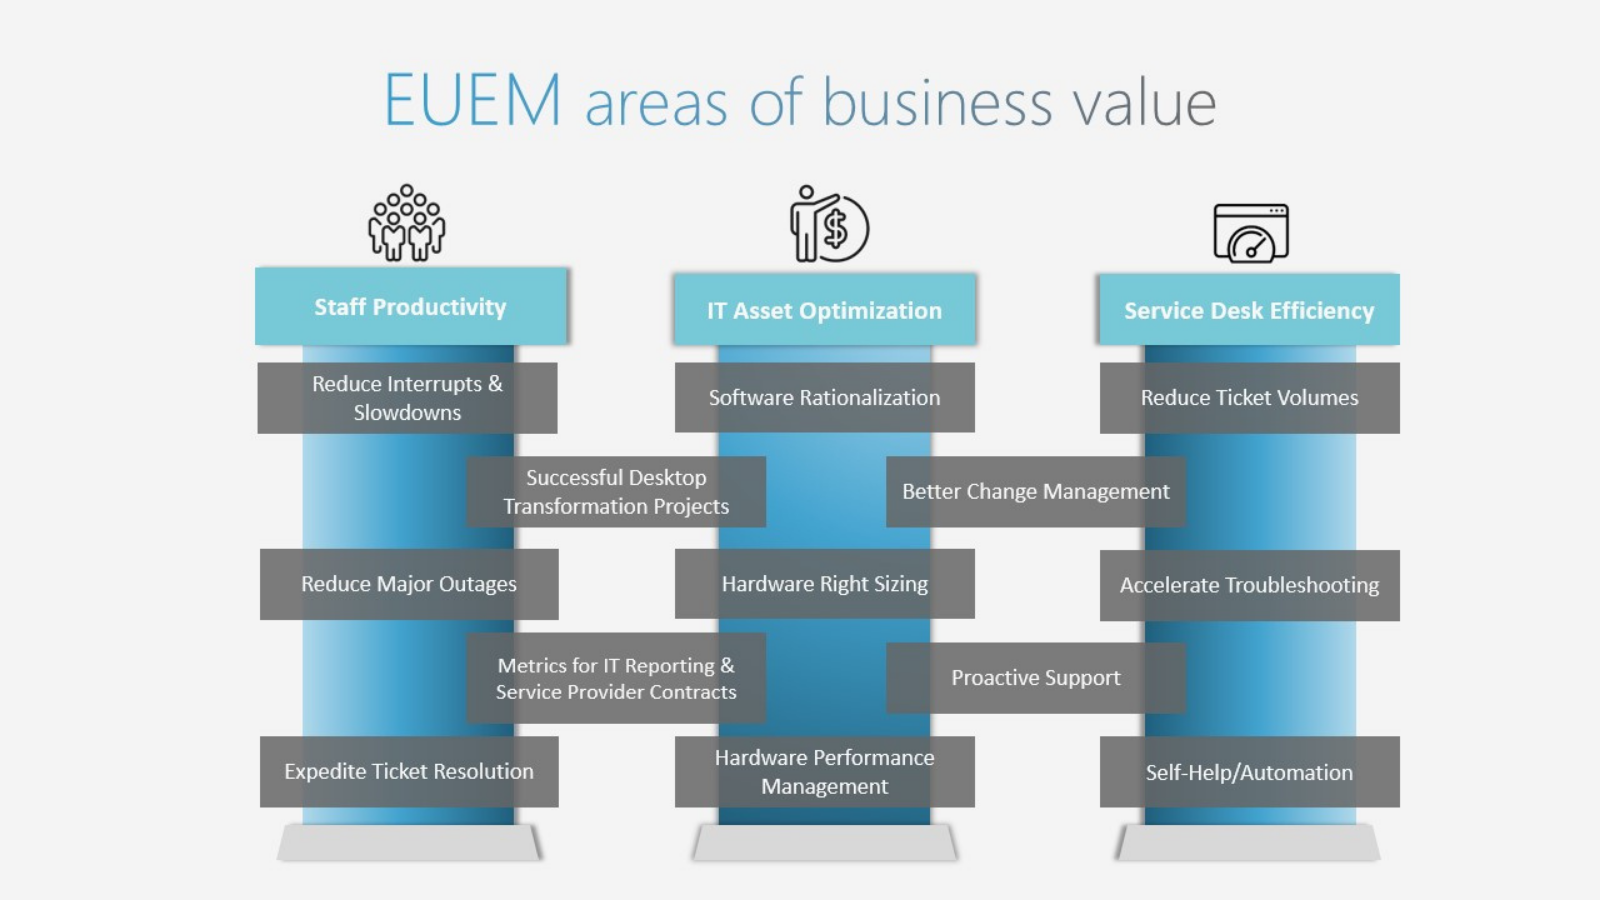 A webinar slide showing the EUEM areas of business value that SysTrack provides.